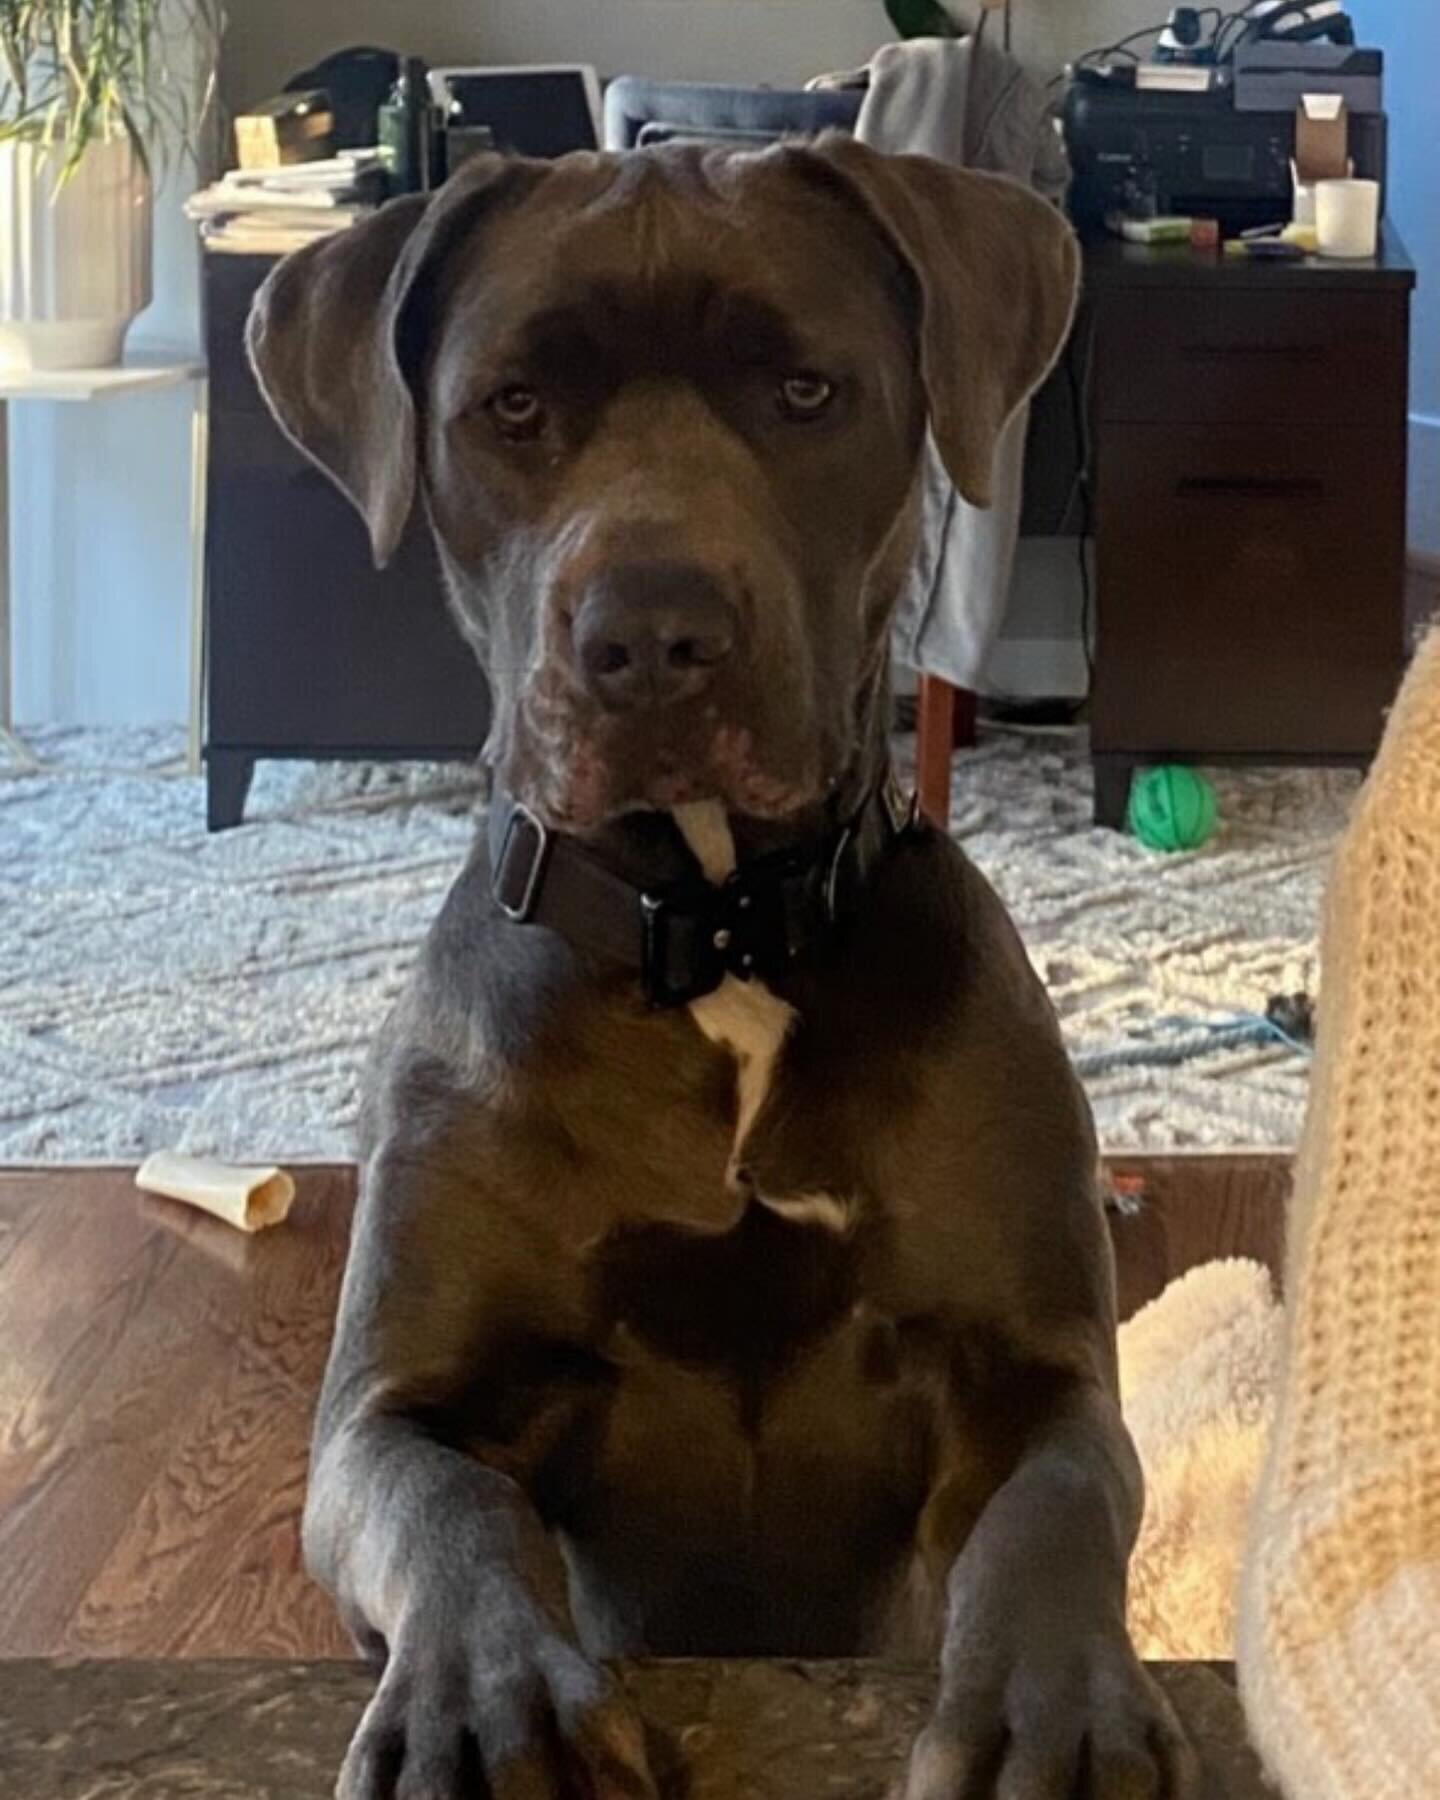 MAYA IS MISSING!
To our followers, Maya is missing! She is a 2y/o King Corso. Last seen in the ARDSLEY area! She is NOT a Westchester Wags pup so if you see her, proceed with EXTREME caution like you would with any other dog!